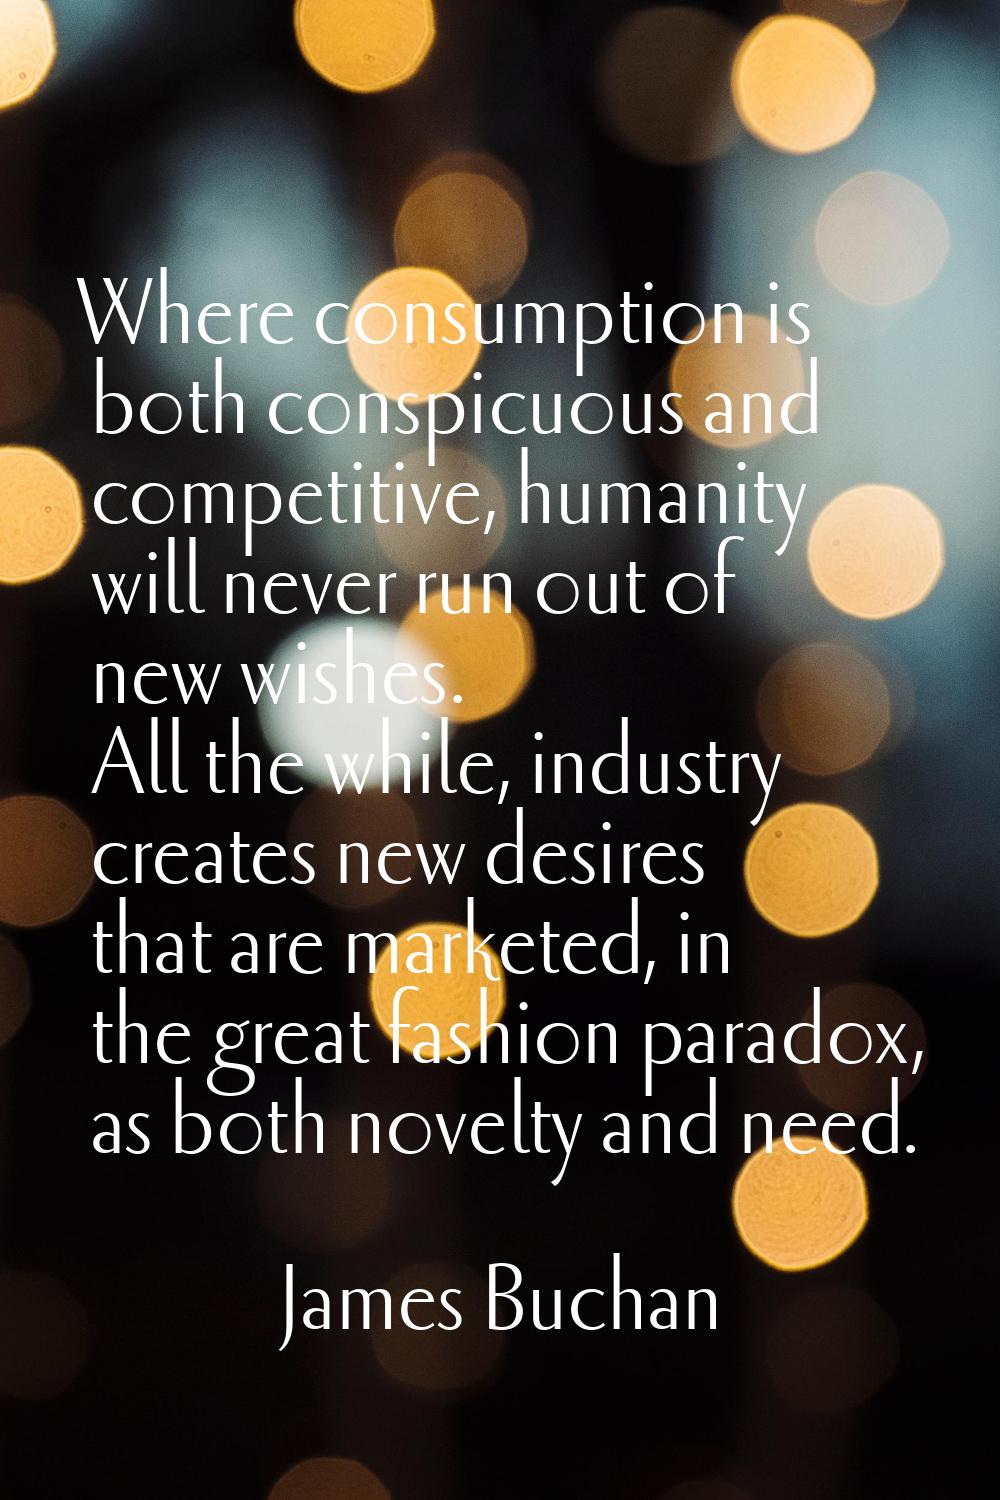 Where consumption is both conspicuous and competitive, humanity will never run out of new wishes. A